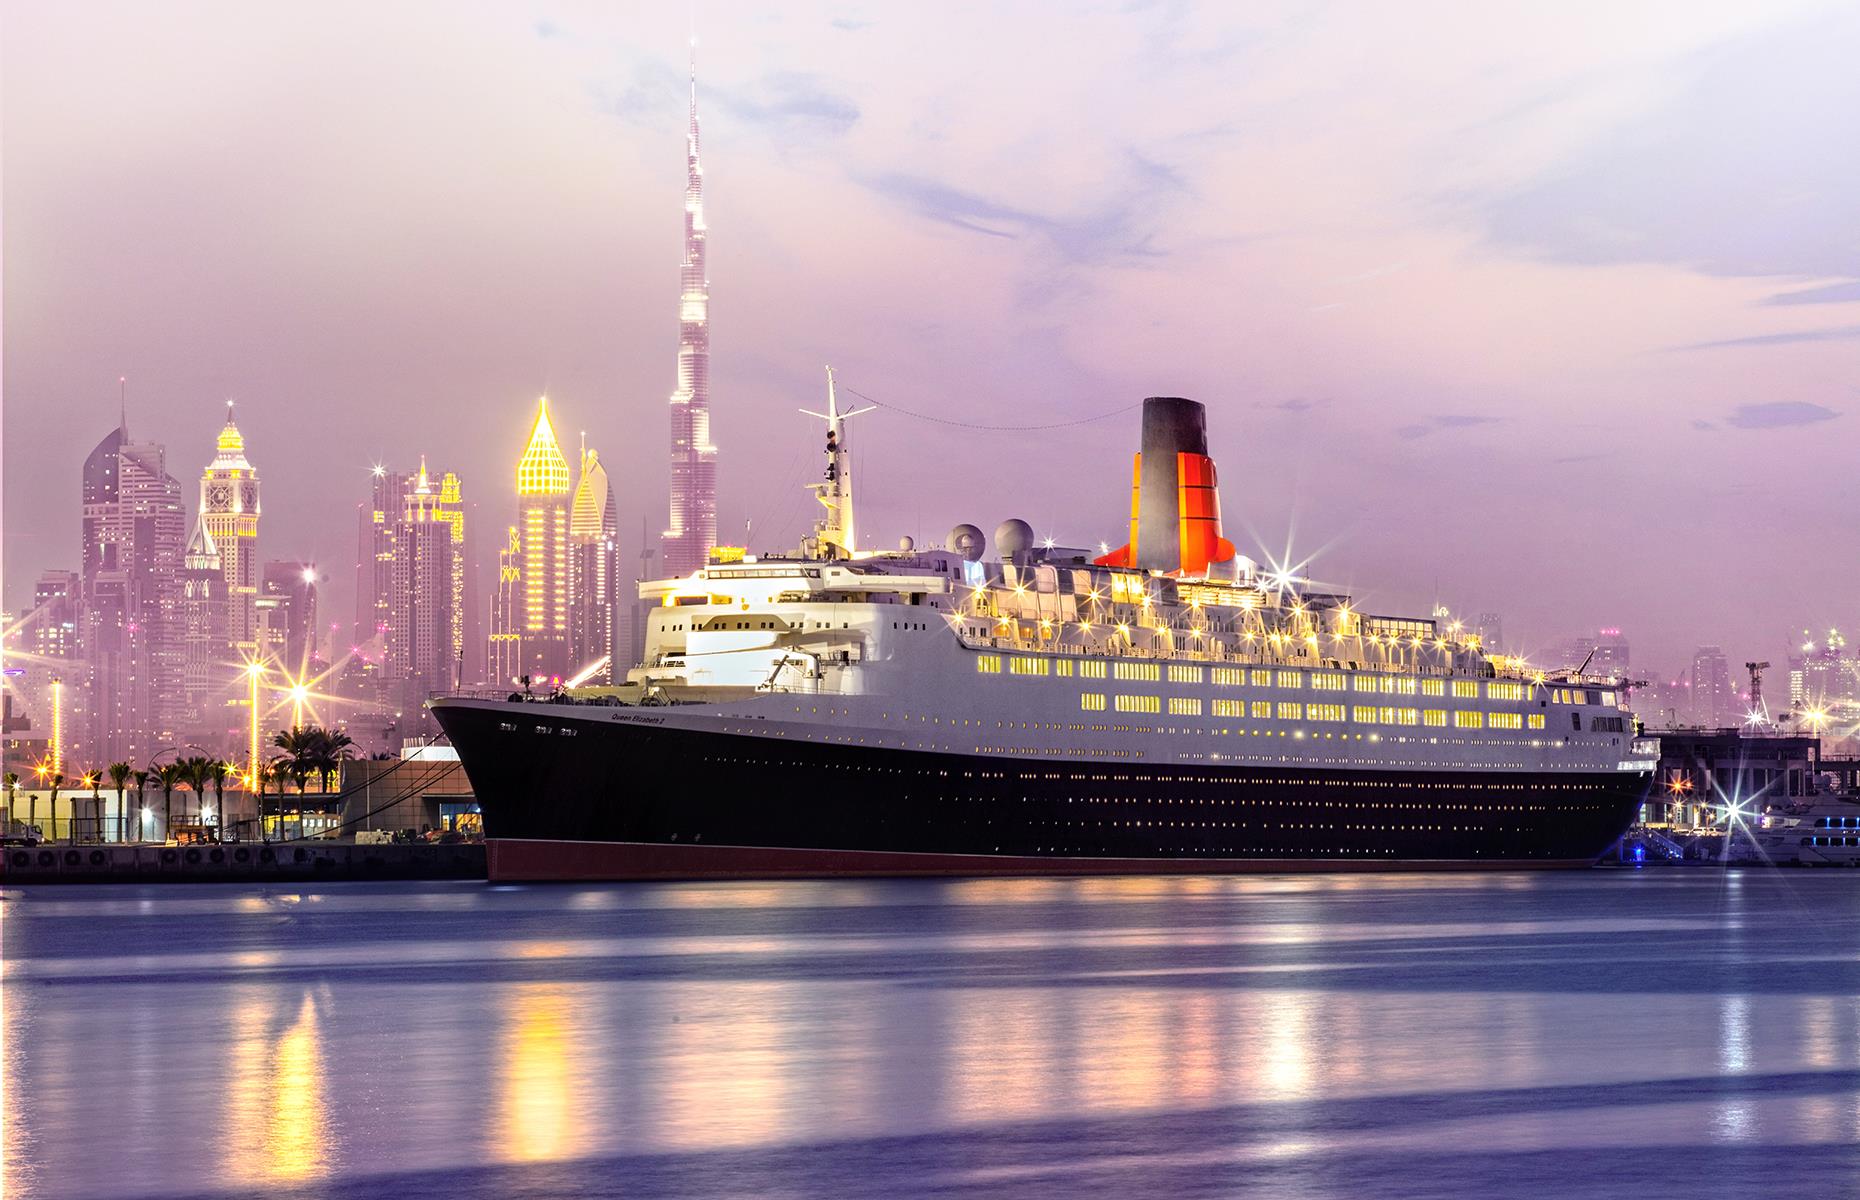 <p>Once one of the most luxurious and legendary cruise liners of the seas, <a href="https://www.qe2.com/en/">the QE2</a> is now permanently docked at Dubai's Mina Rashid cruise terminal and finally opened in 2018, after a 10-year restoration process, as a luxury hotel. It's filled with 224 luxurious rooms, including two Royal suites only bookable by invitation.</p>